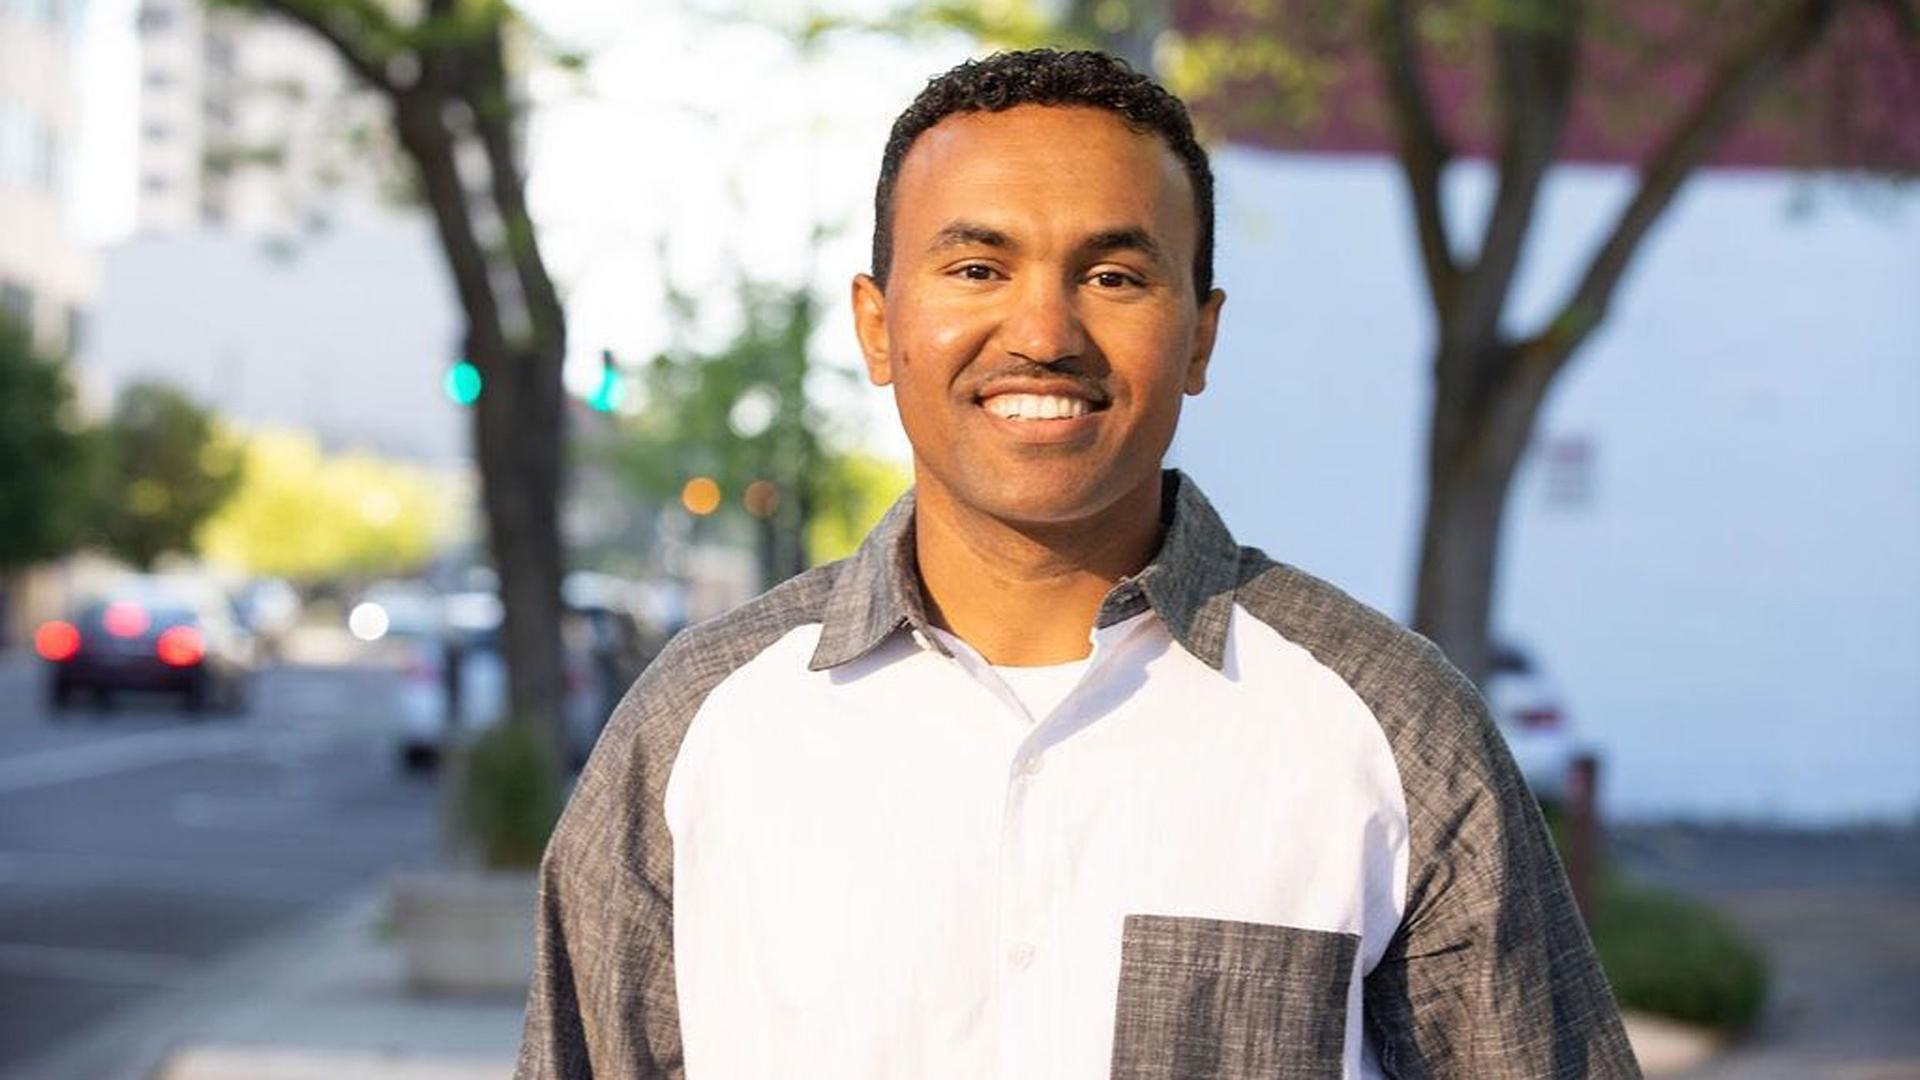 Tecle Gebremichael, a refugee born in Ethiopia who was resettled to the US, has also advocated for the expansion of the US resettlement program.